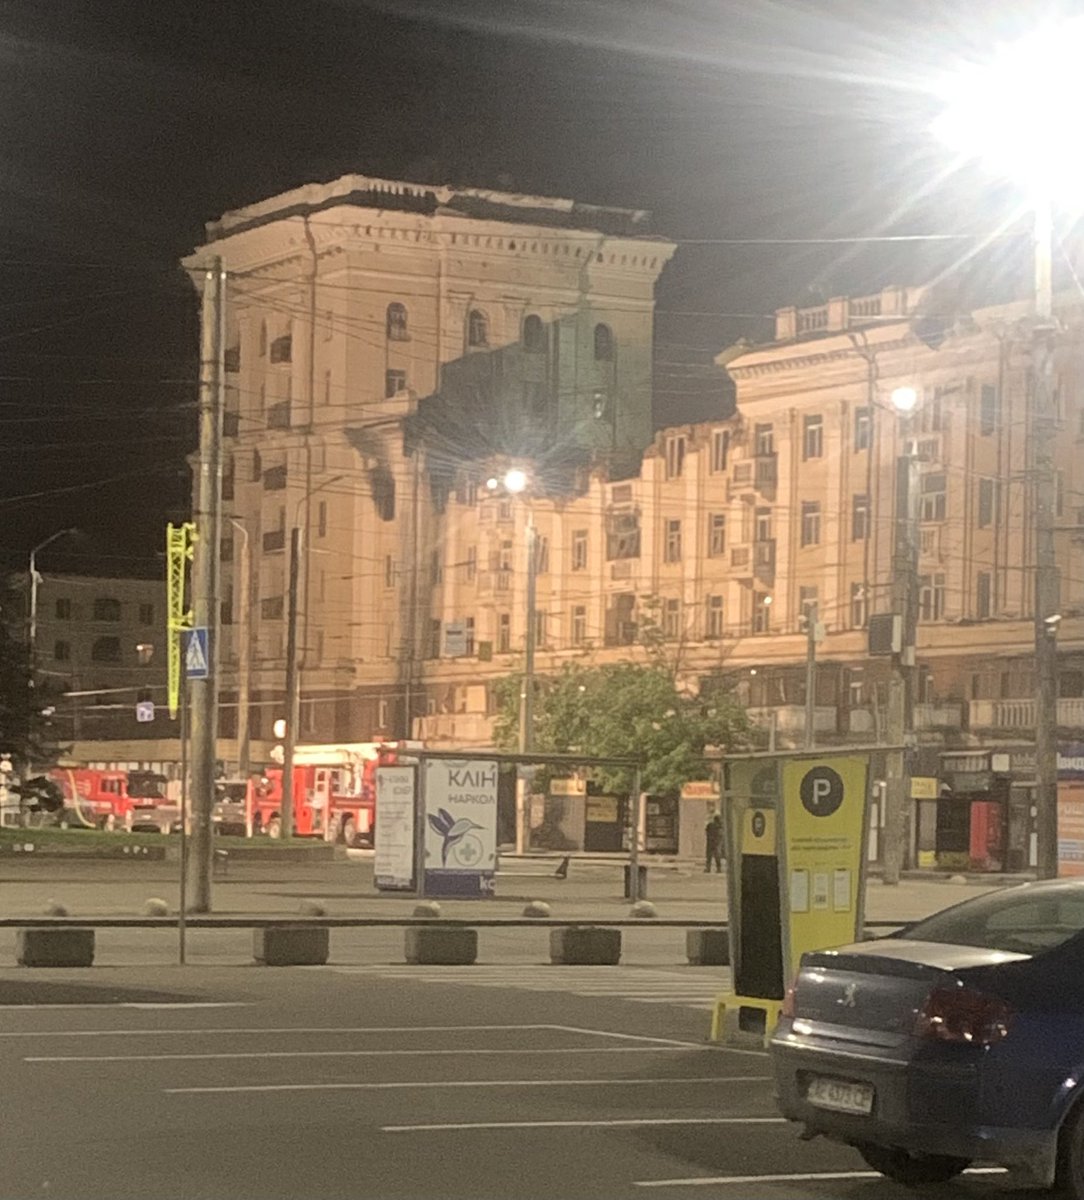 This is the damage just outside the Dnipro train station tonight. Just blatant terror!